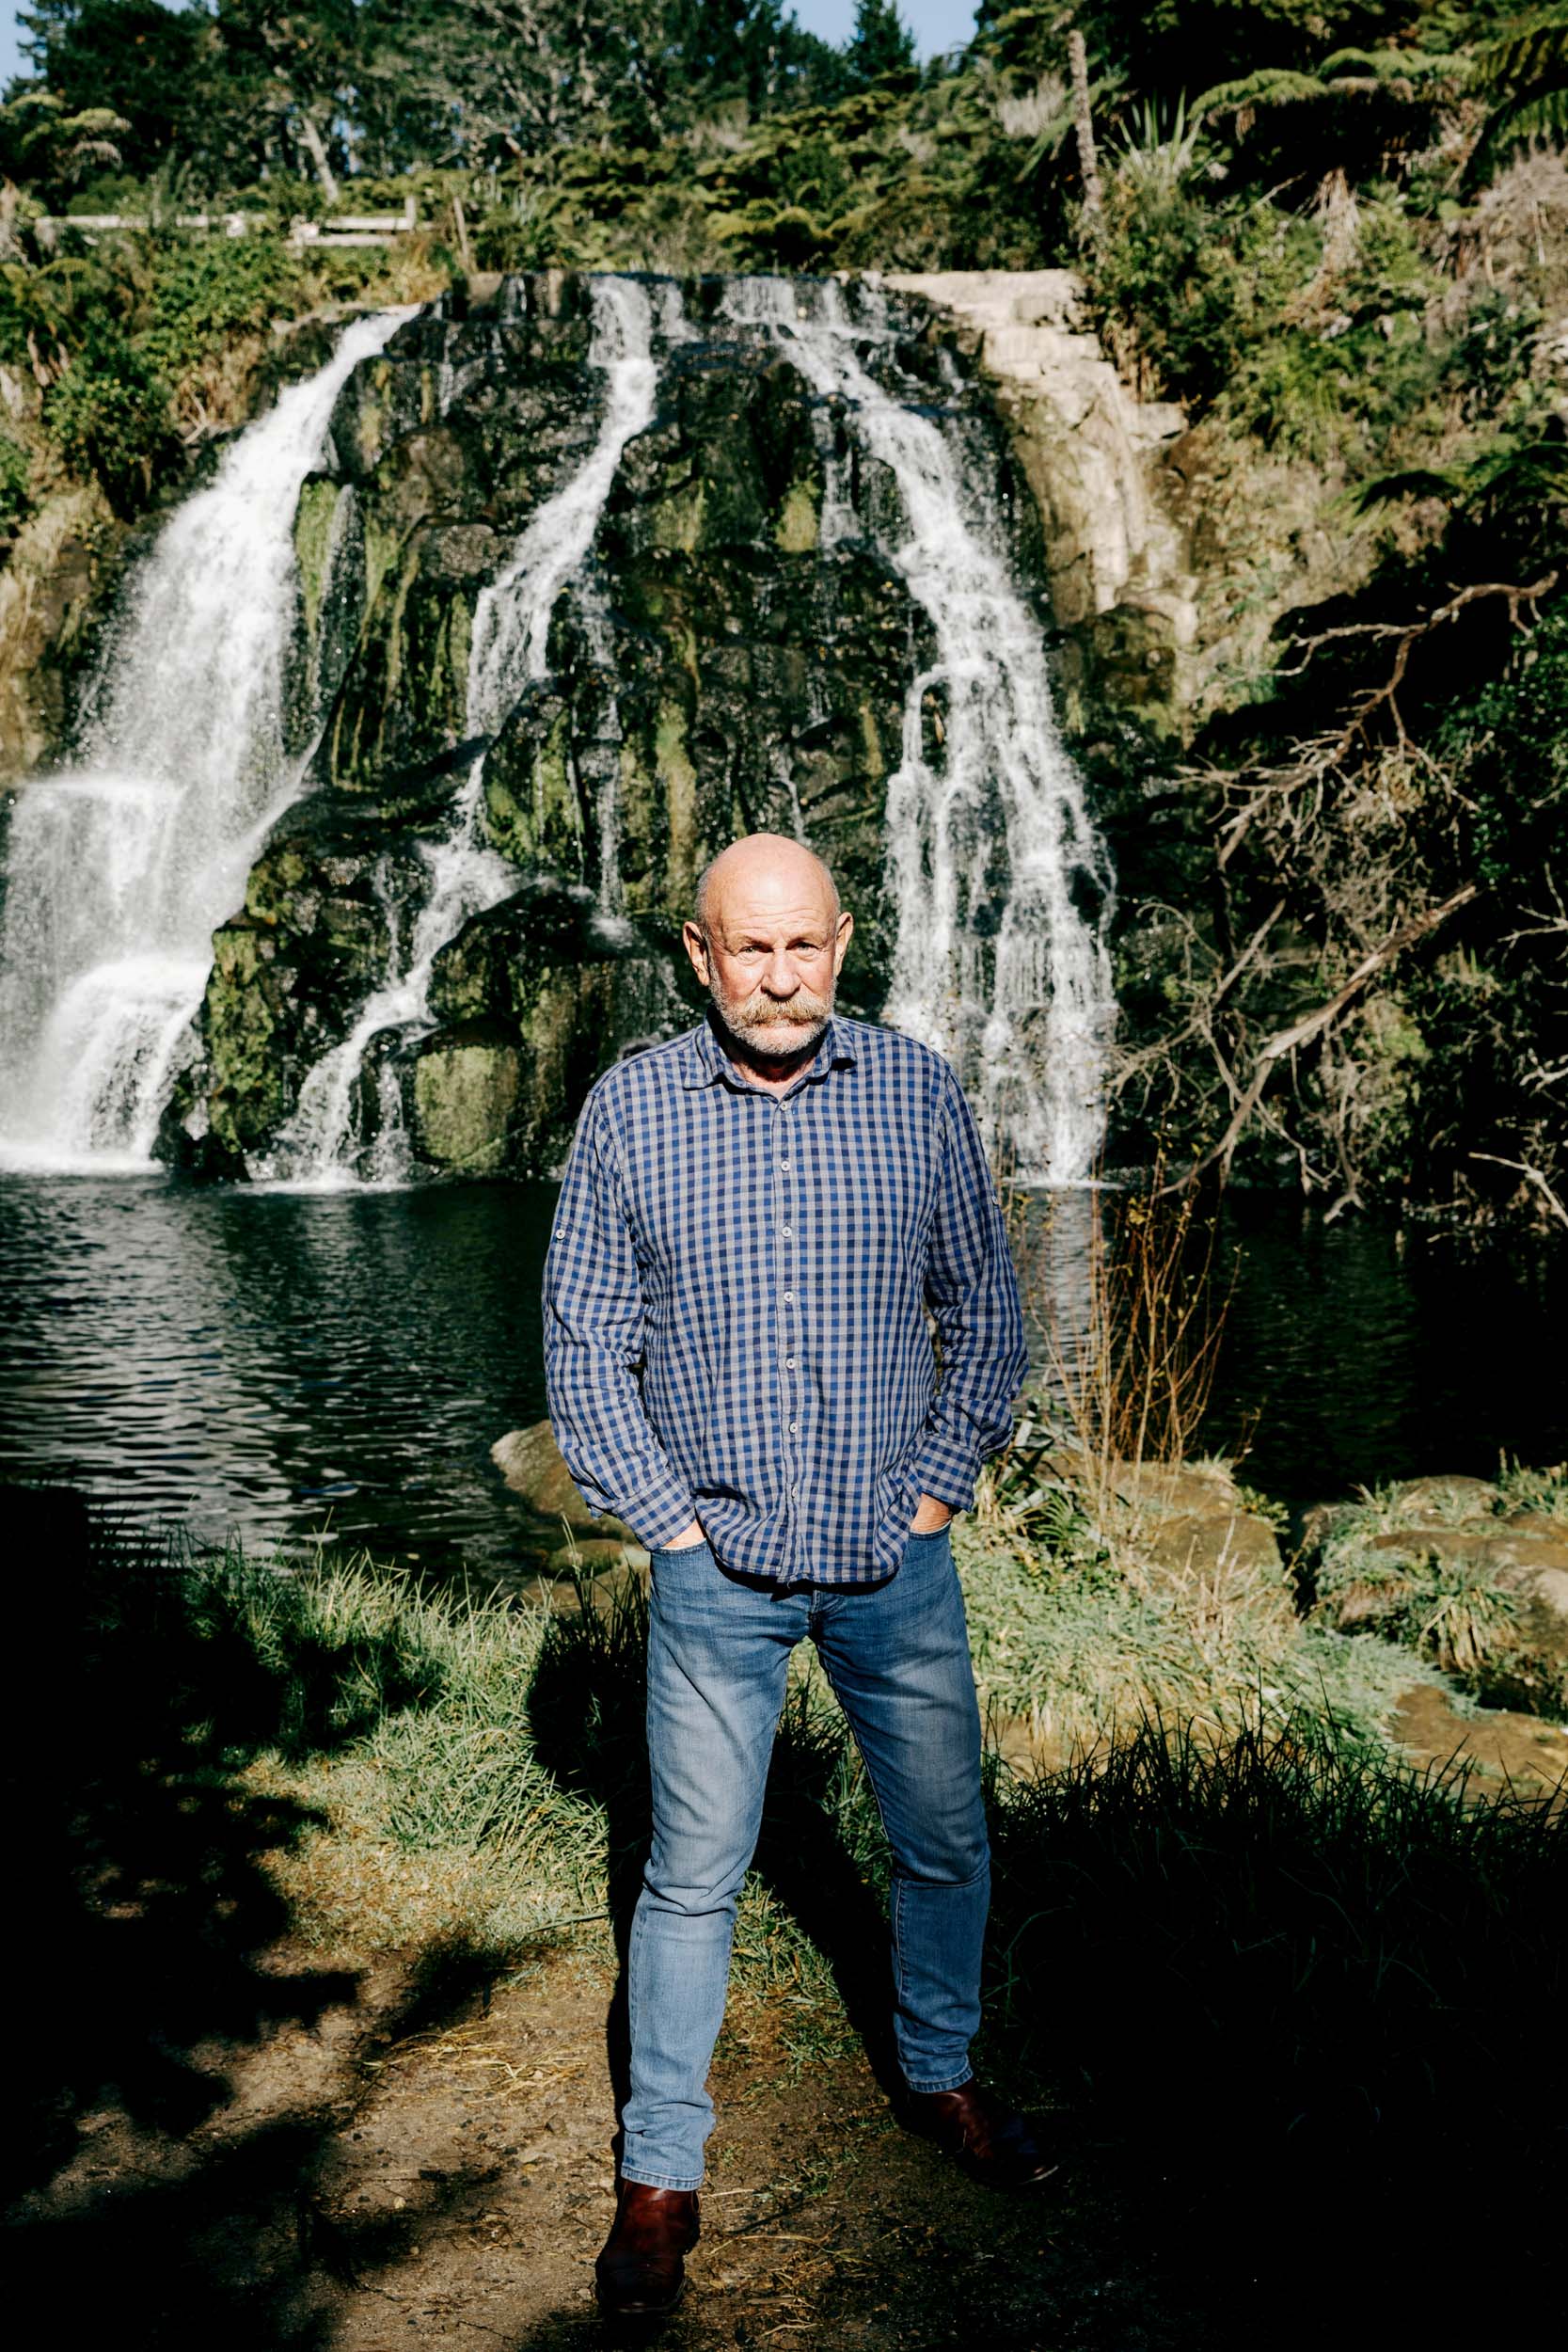 Mark Sainsbury in front of waterfall